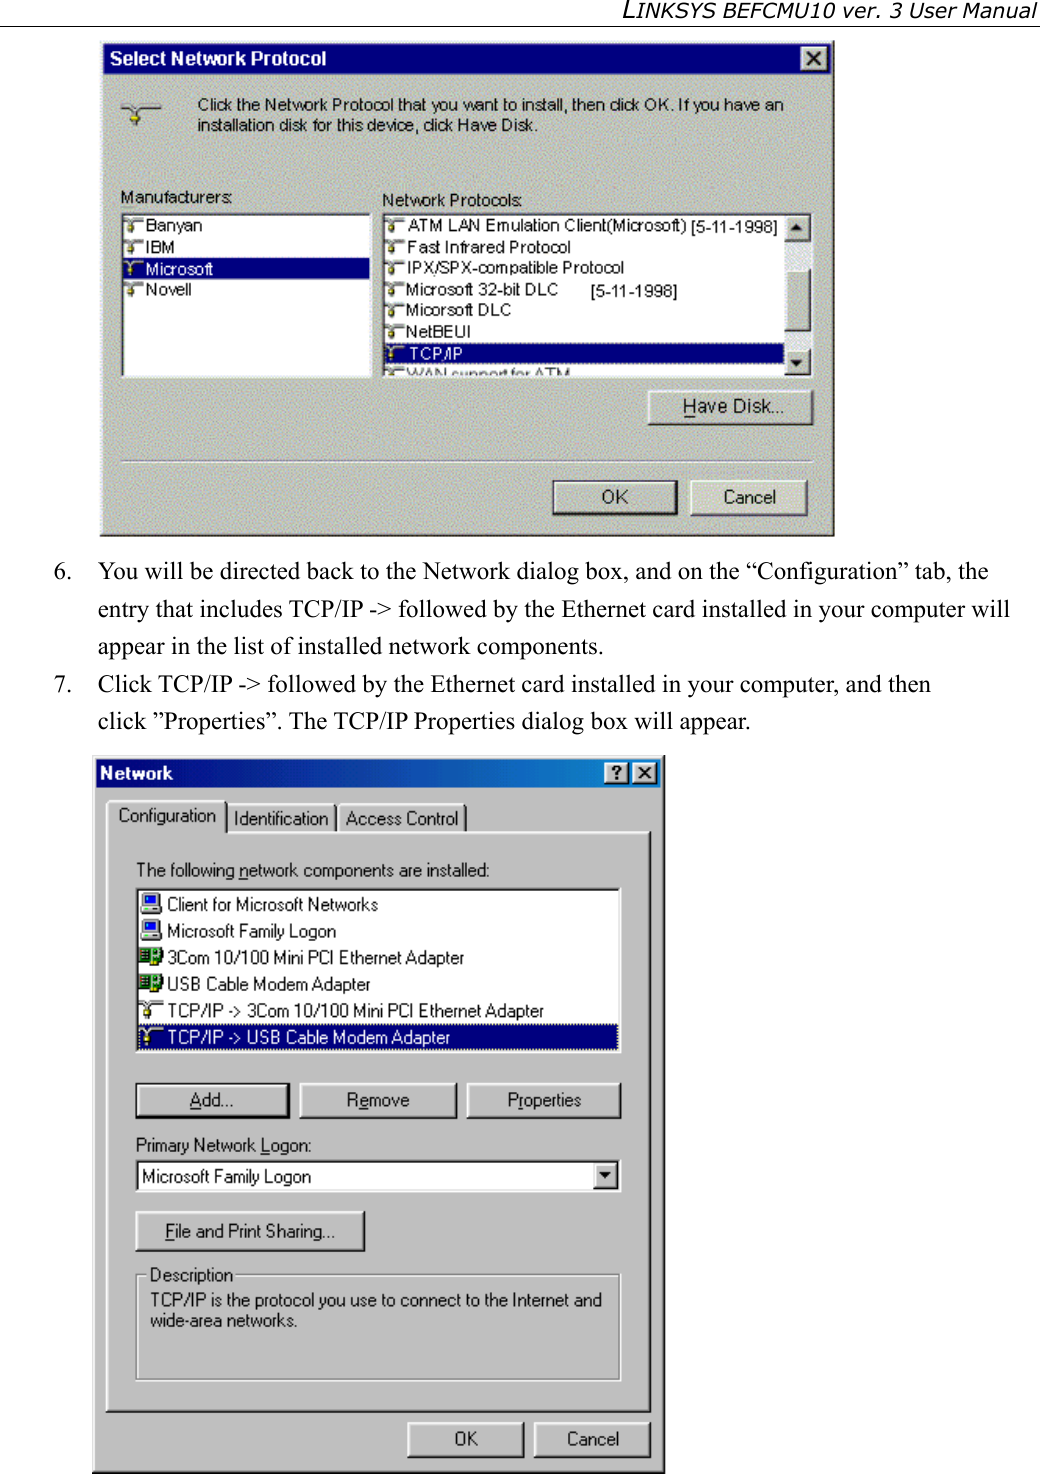 LINKSYS BEFCMU10 ver. 3 User Manual    6.  You will be directed back to the Network dialog box, and on the “Configuration” tab, the entry that includes TCP/IP -&gt; followed by the Ethernet card installed in your computer will appear in the list of installed network components. 7.  Click TCP/IP -&gt; followed by the Ethernet card installed in your computer, and then click ”Properties”. The TCP/IP Properties dialog box will appear.  